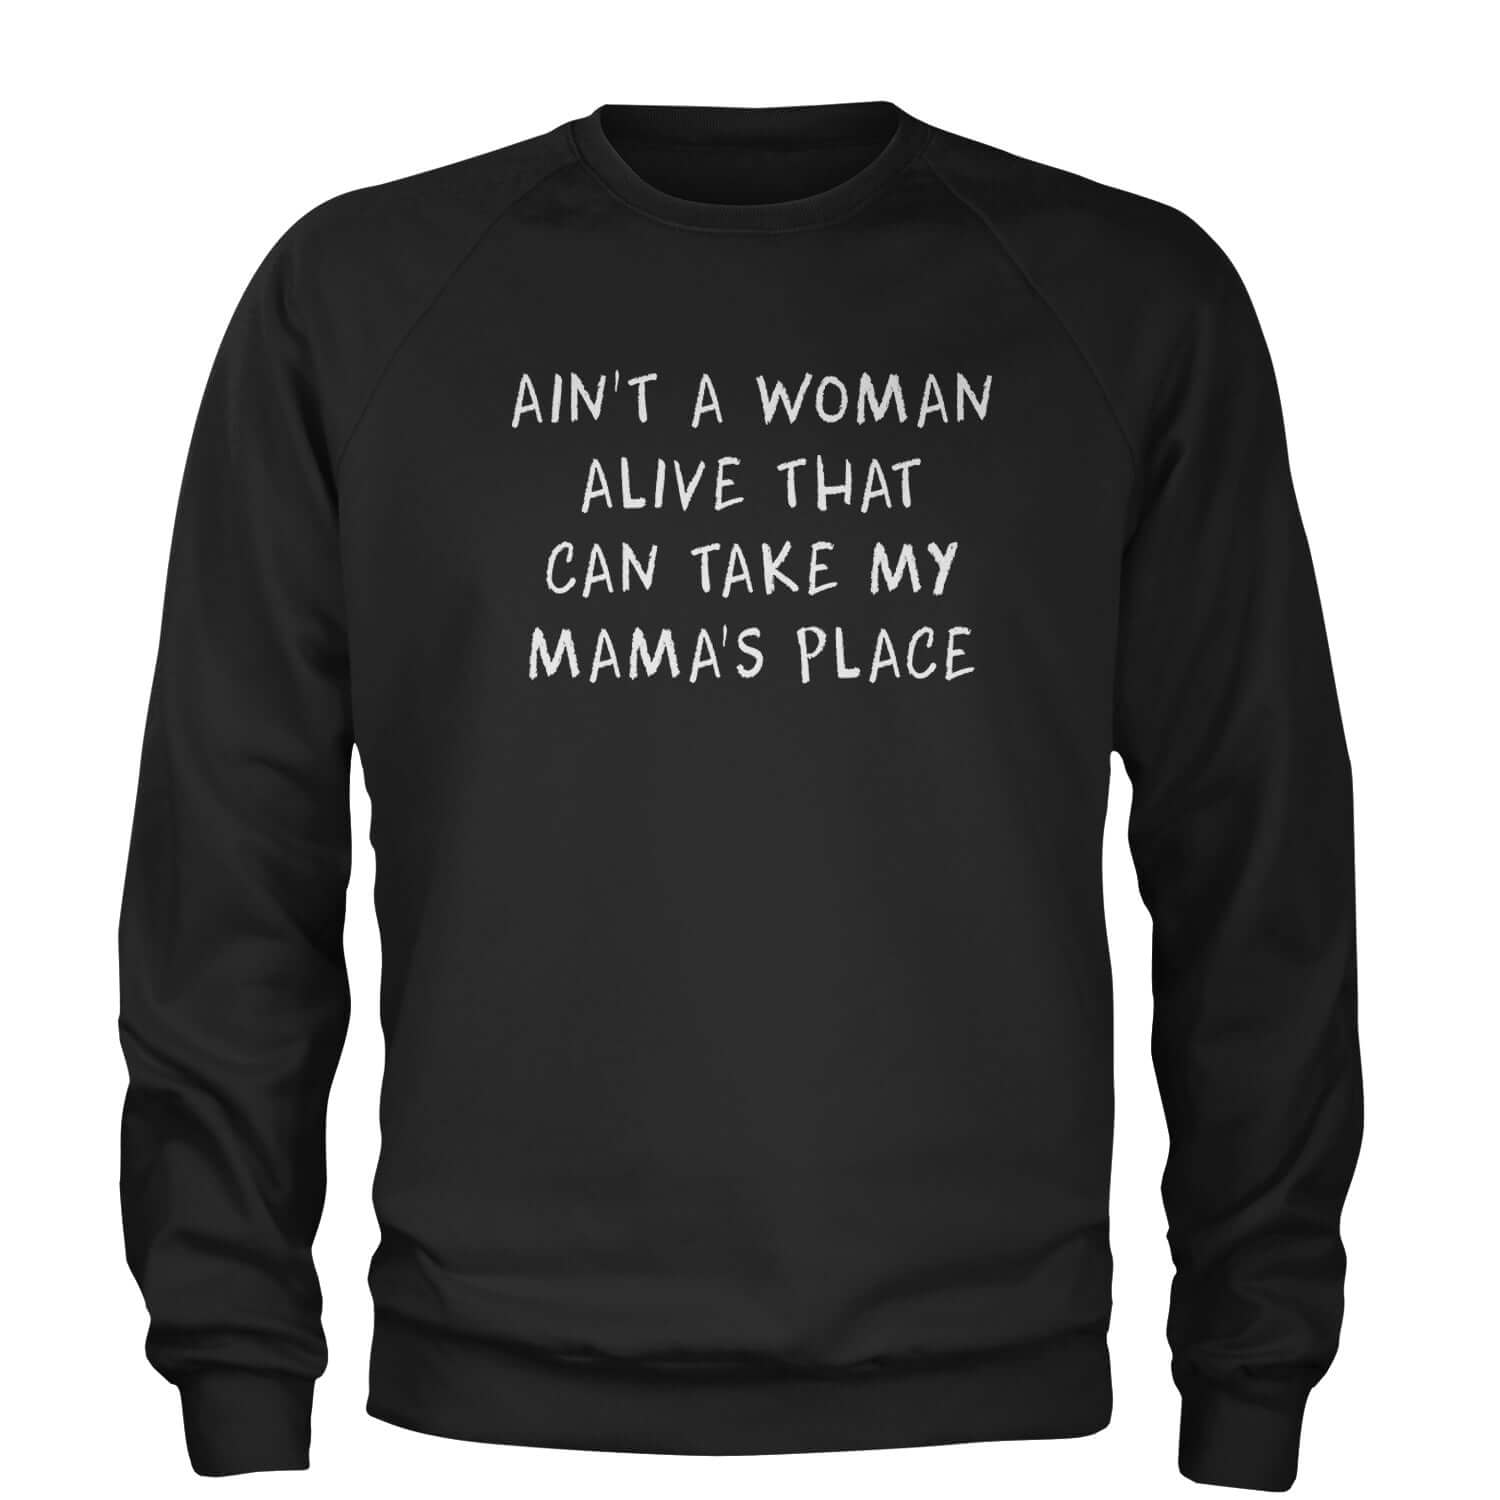 Ain't A Woman Alive That Can Take My Mama's Place Adult Crewneck Sweatshirt 2pac, bear, day, mama, mom, mothers, shakur, tupac by Expression Tees